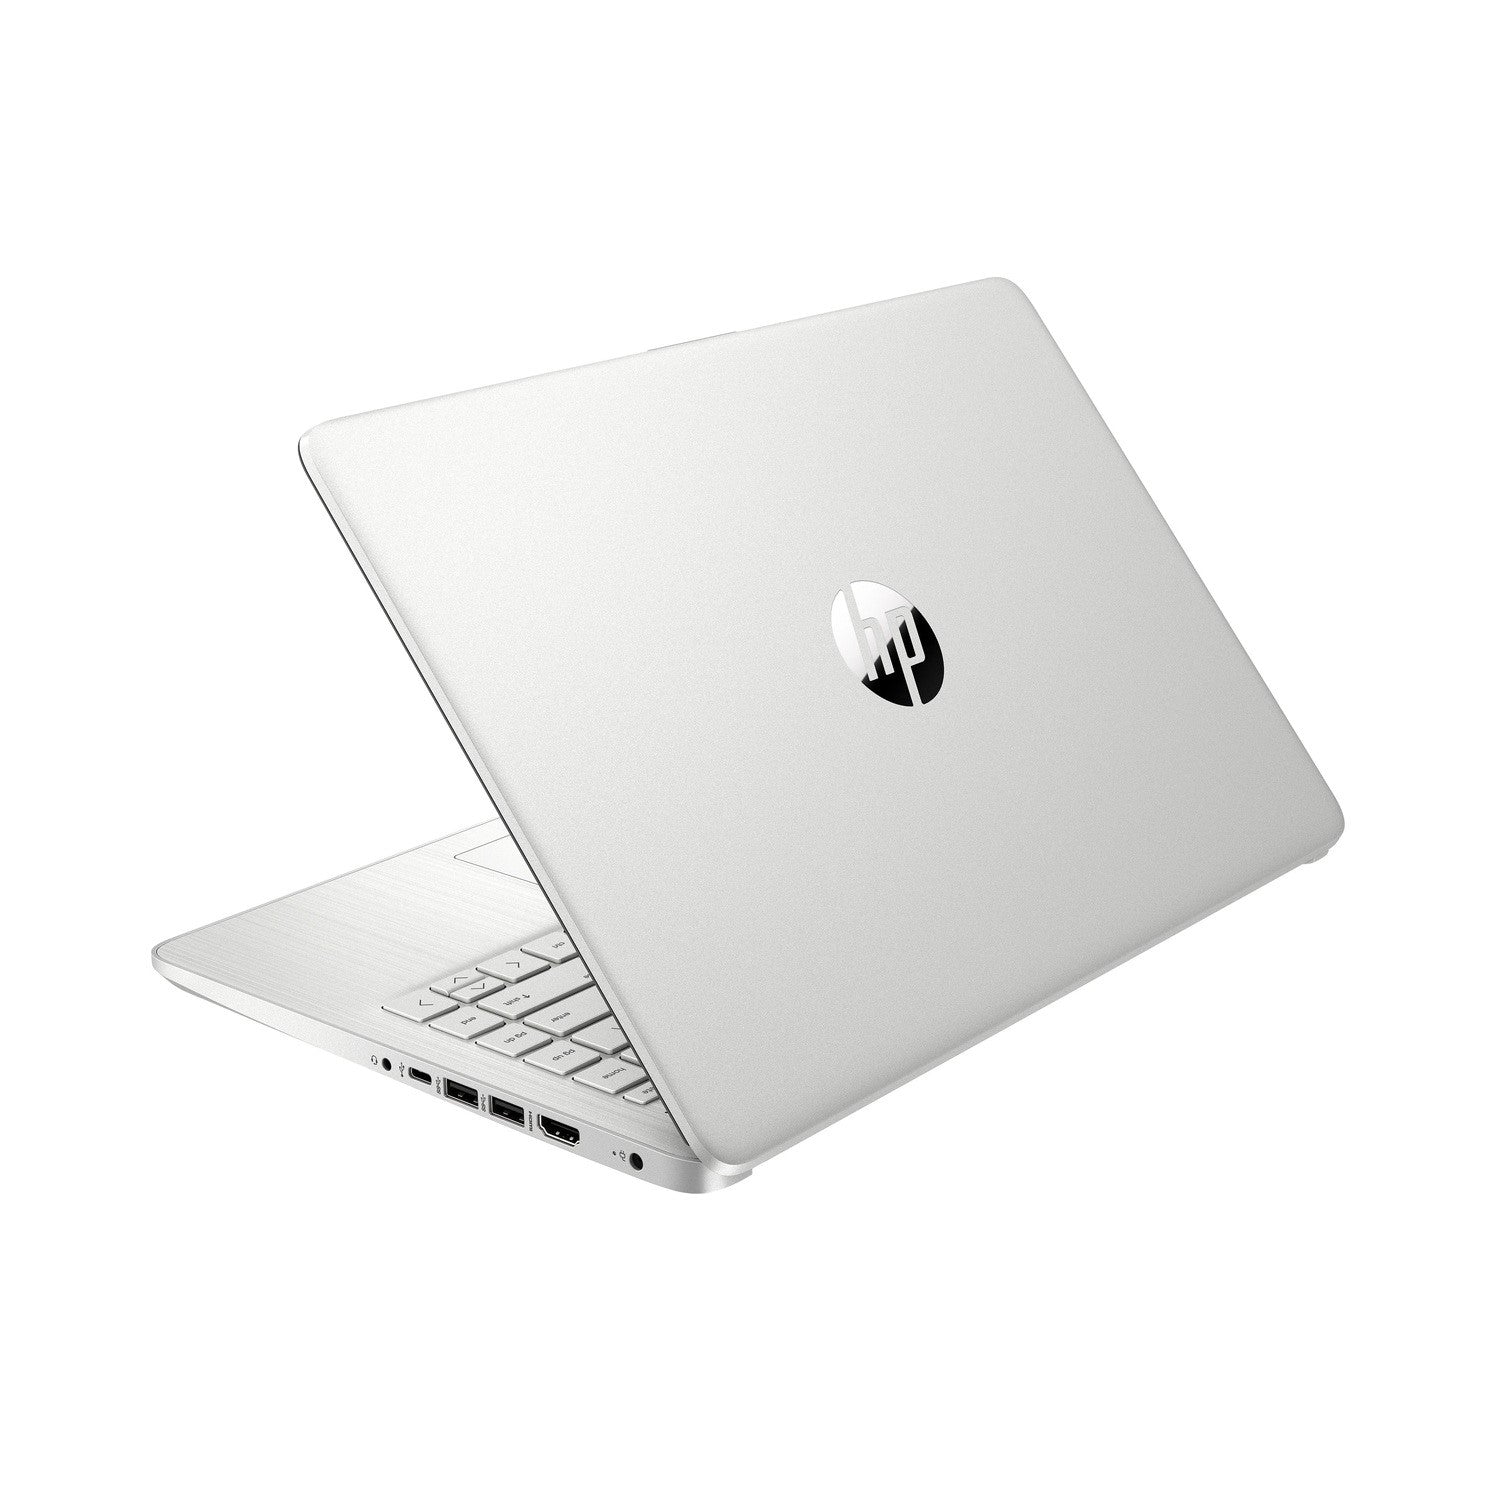 HP 14S-DQ2514SA 14" Laptop Intel Core i7 8GB RAM 512GB SSD - Silver - Refurbished Excellent